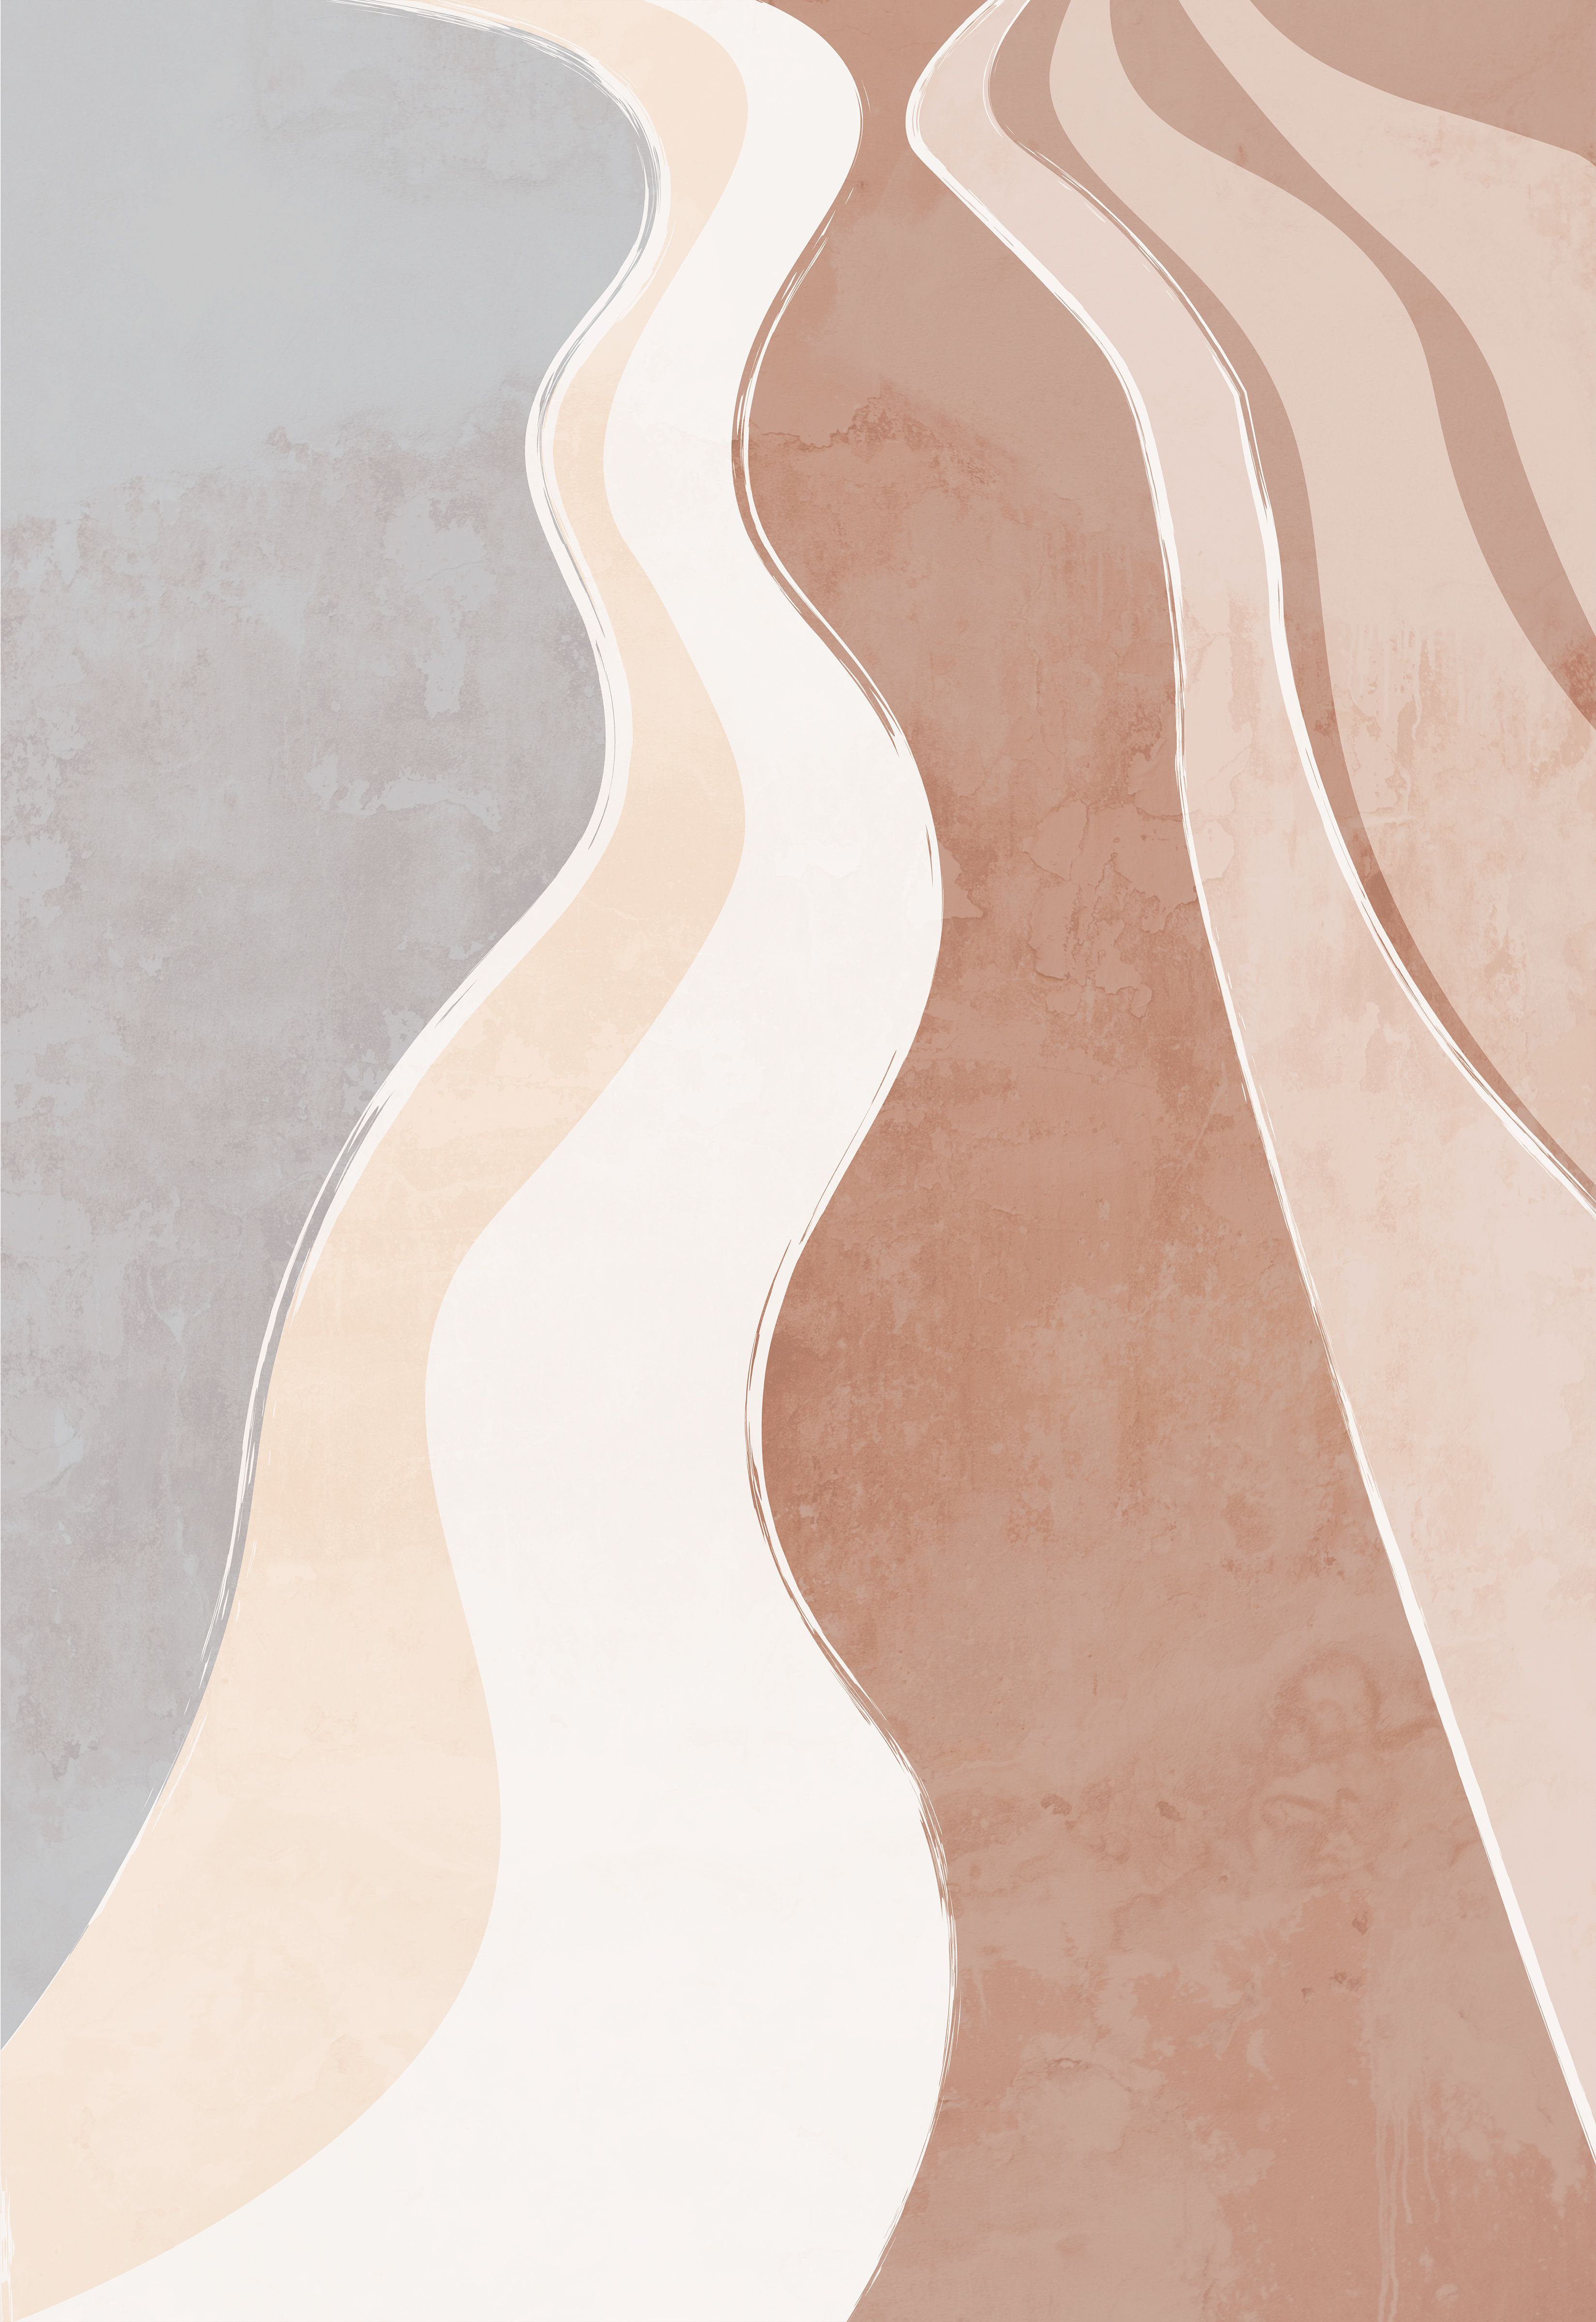 An image featuring a watercolor painting of abstract shapes in brown, beige, and white. - Boho, neutral